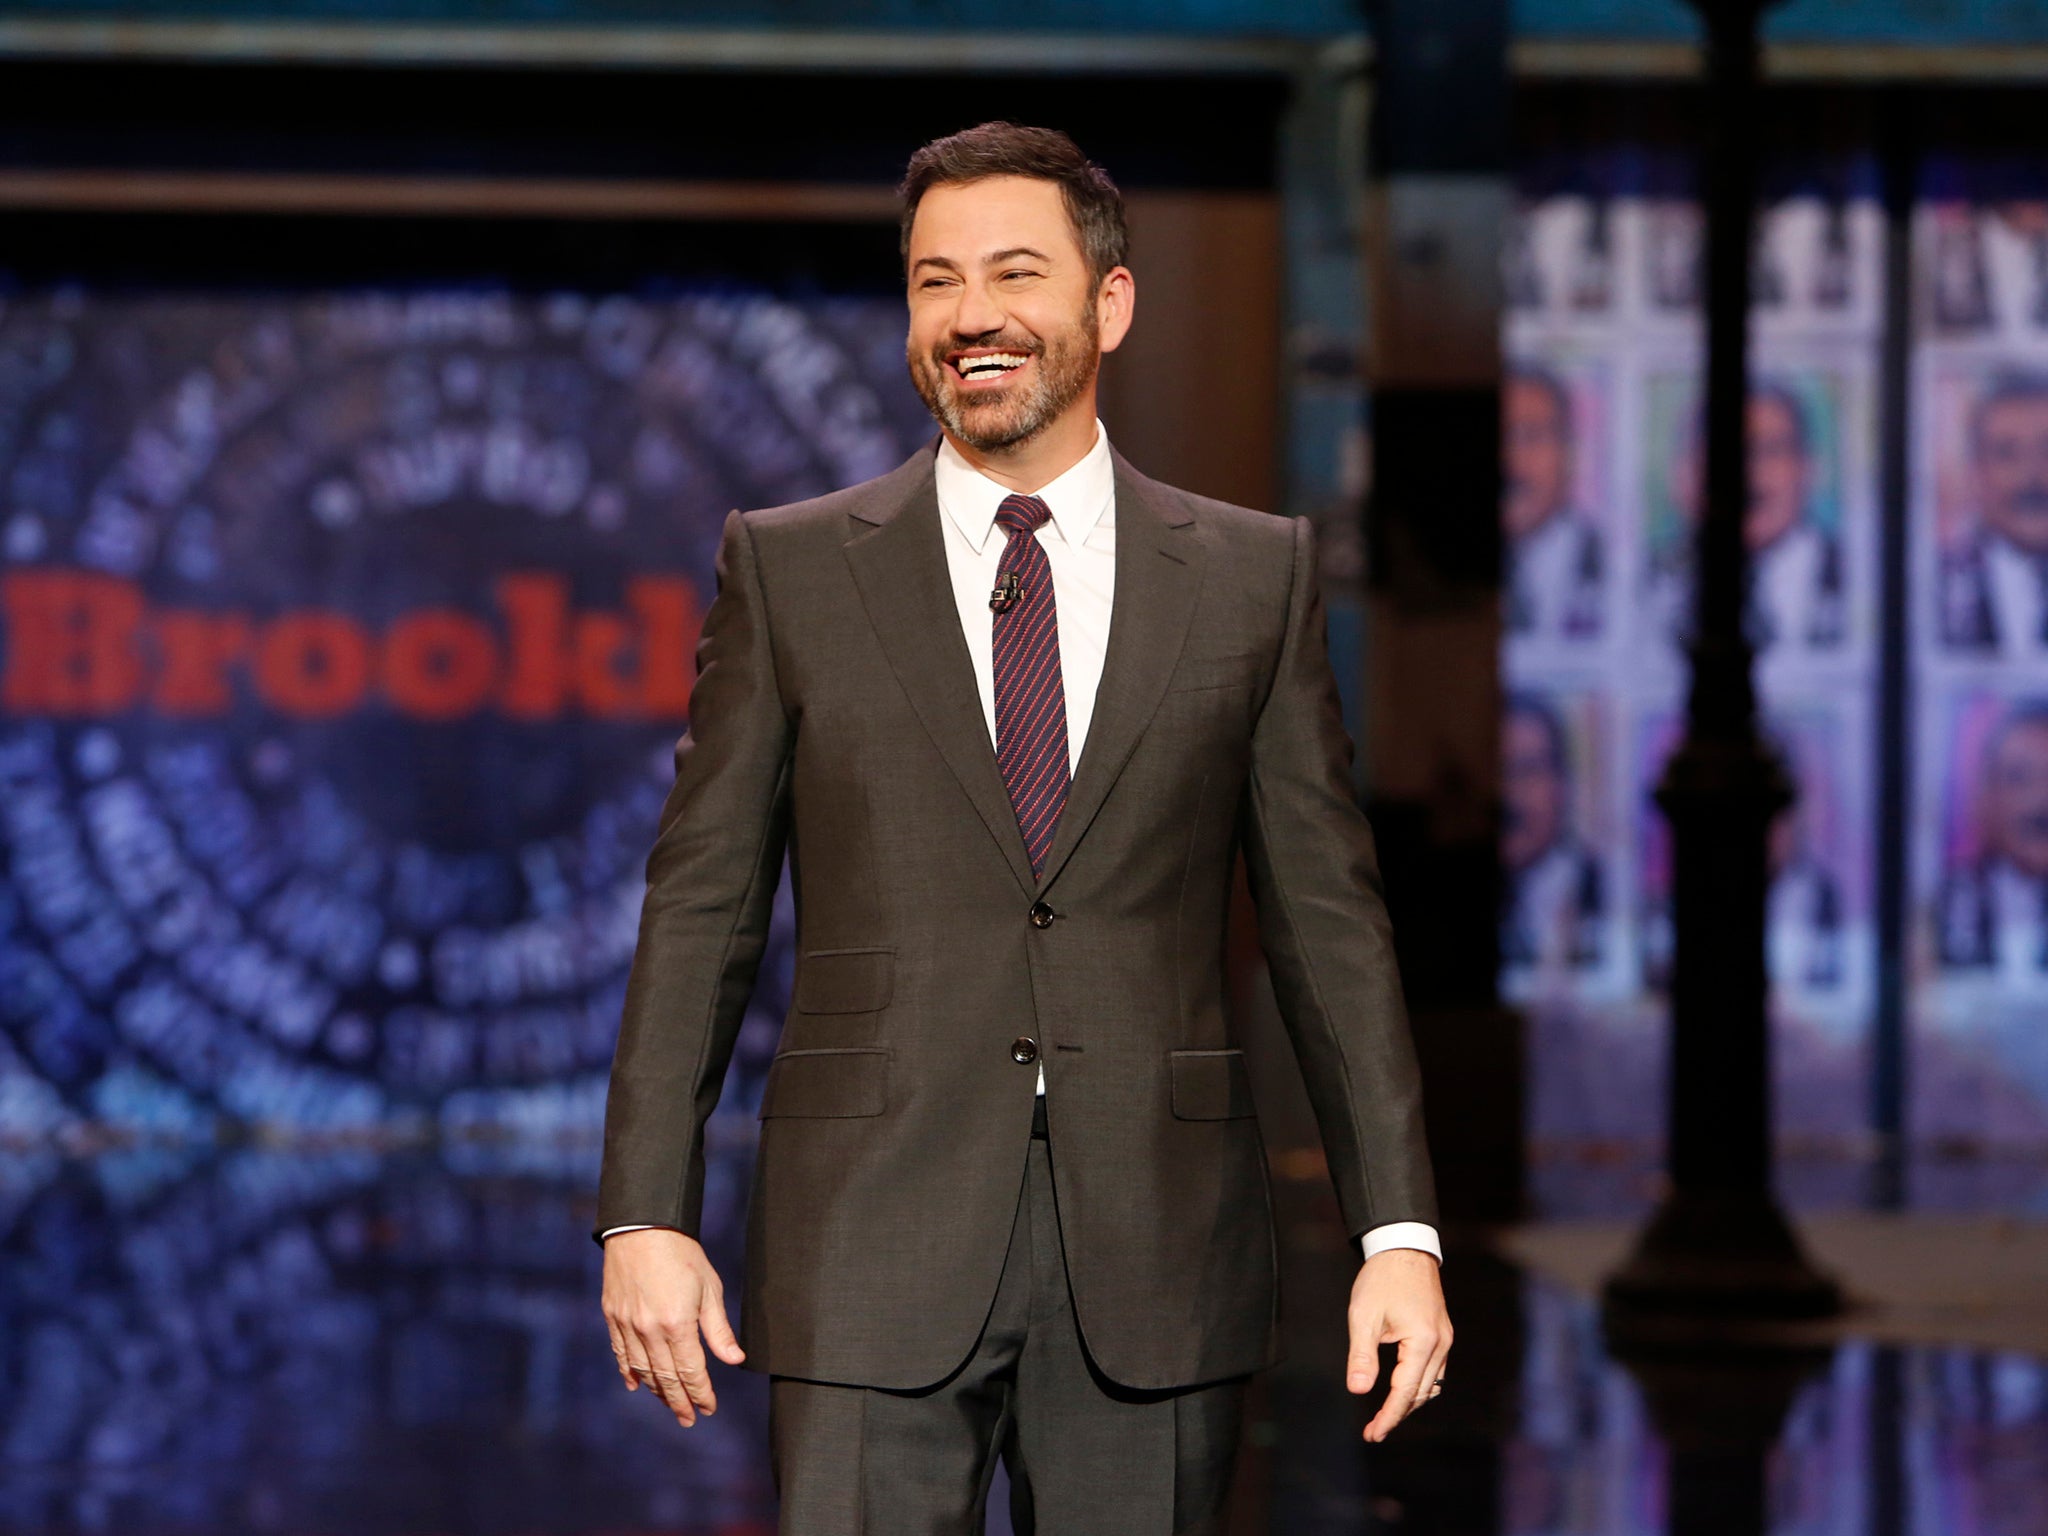 Kimmel has been accused of wading into politically pointed territory that isn’t appropriate for a network TV host